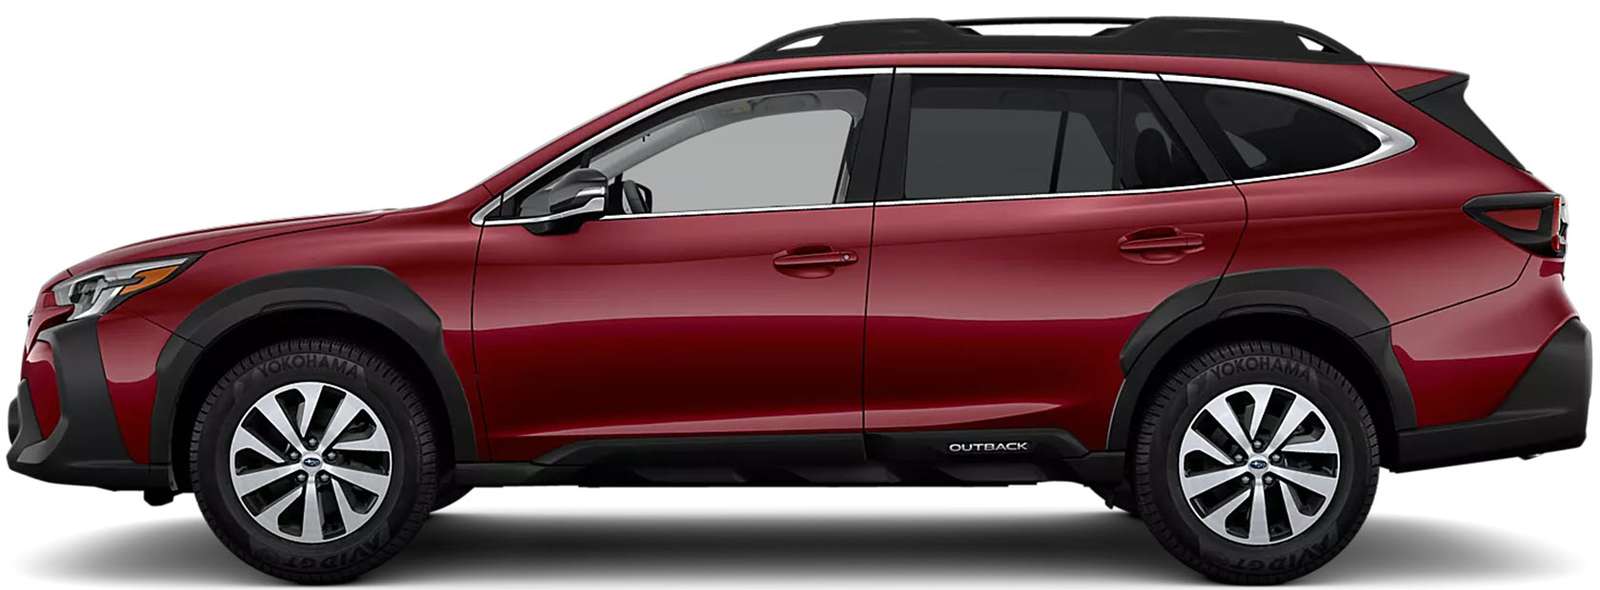 Red Subaru Outback puzzle online from photo